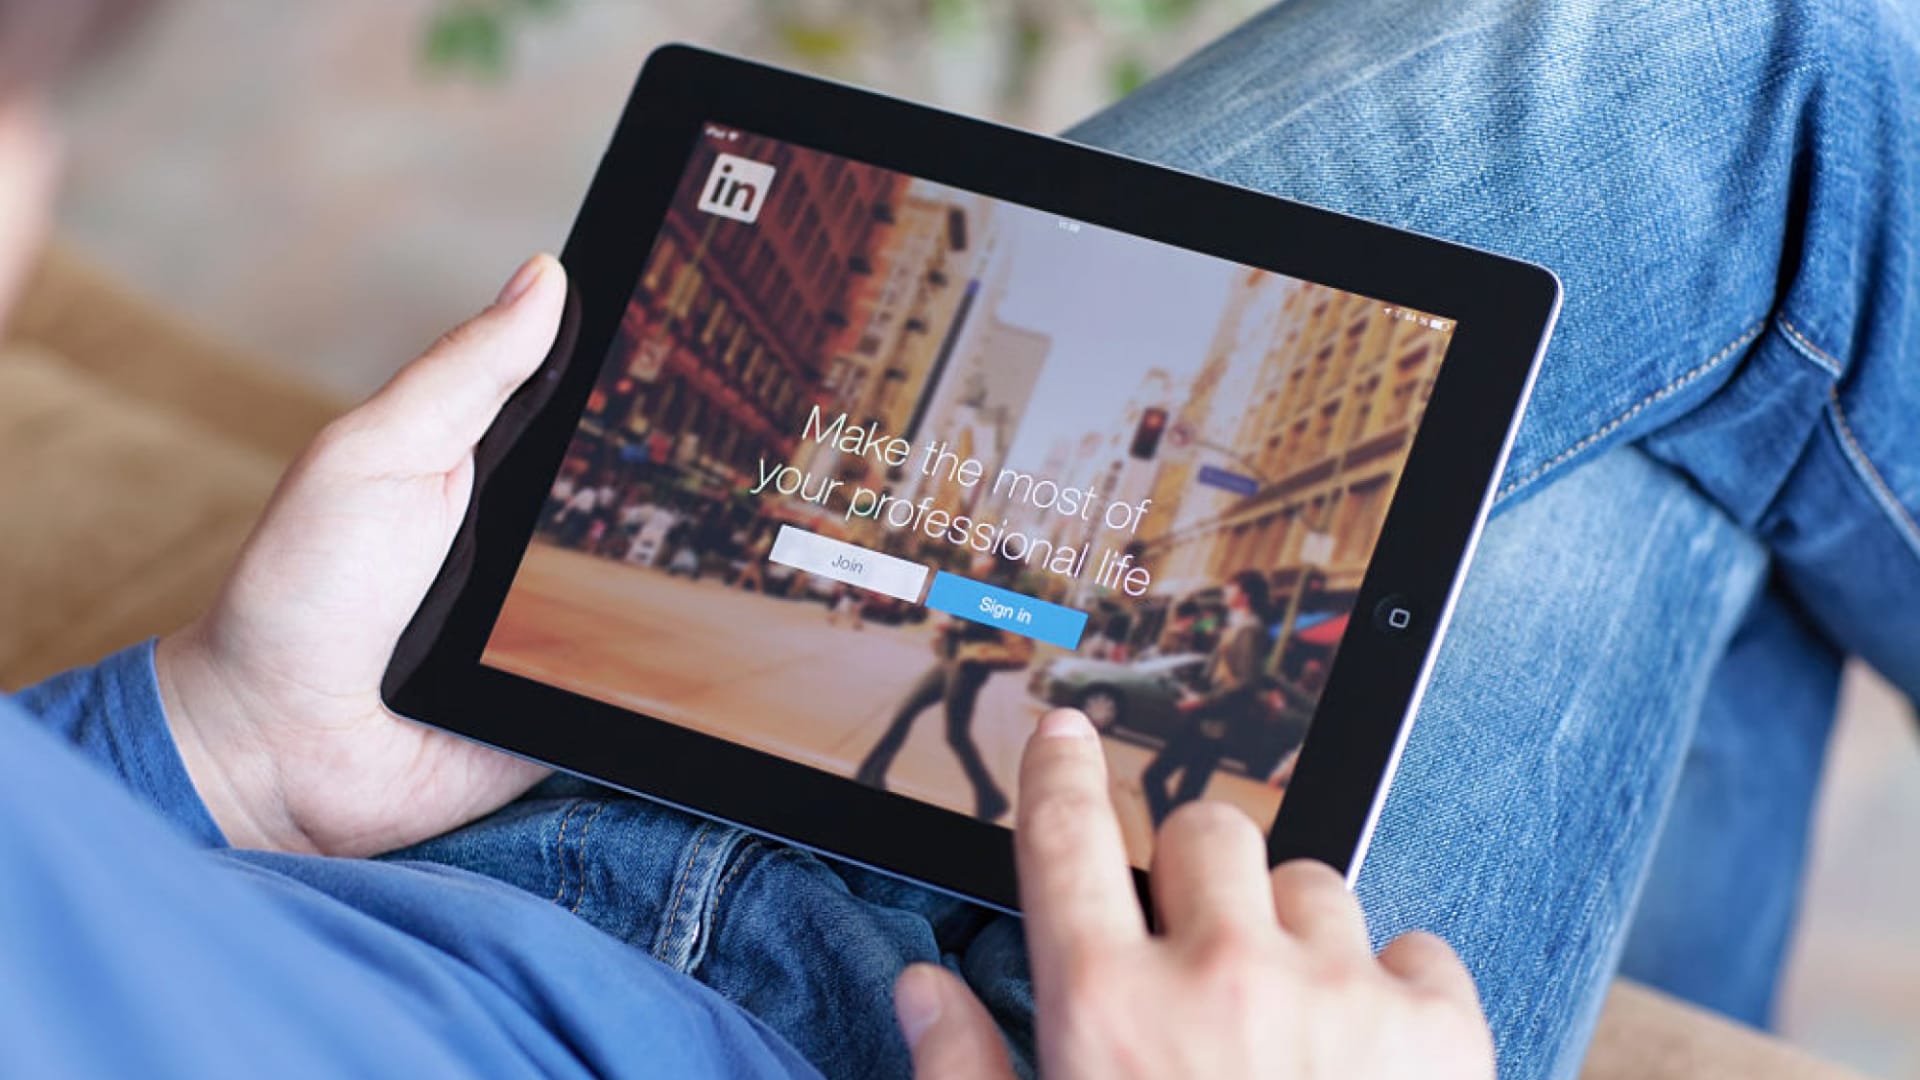 LinkedIn Rolls Out 2 New Features: 'Stories' and Video Meetings